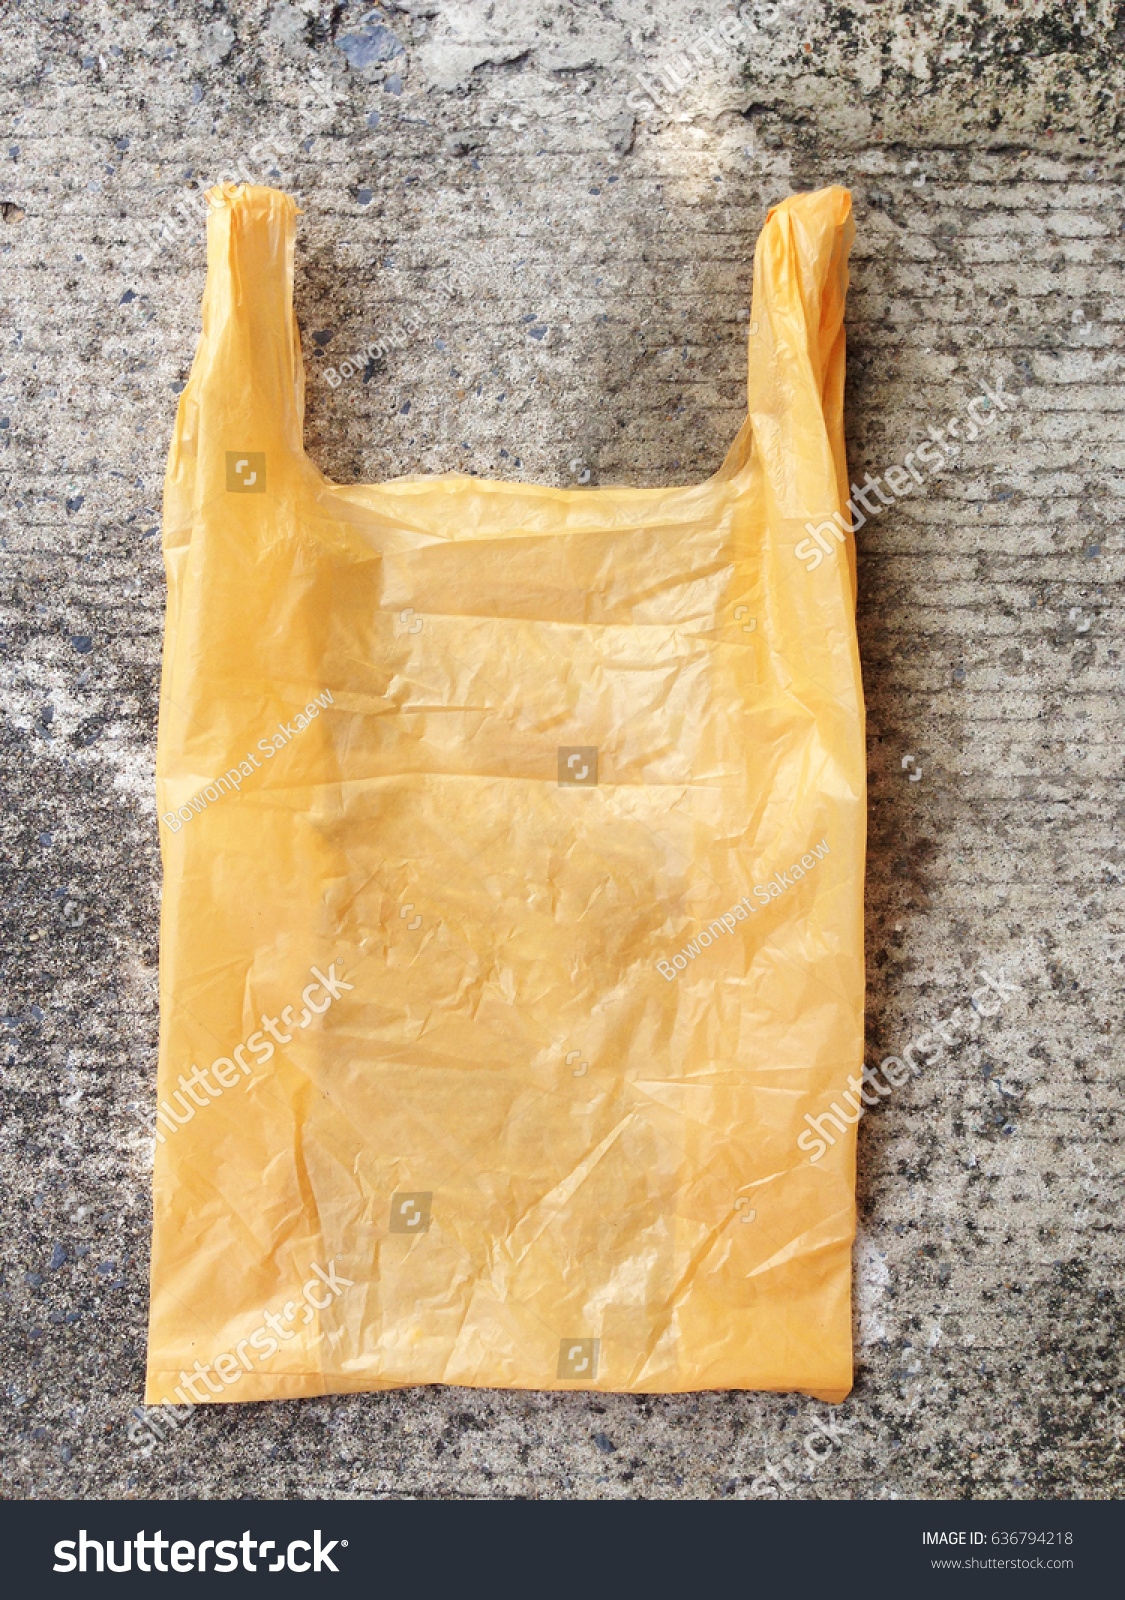 Download Yellow Plastic Bag On Cement Floor Royalty Free Stock Image Yellowimages Mockups